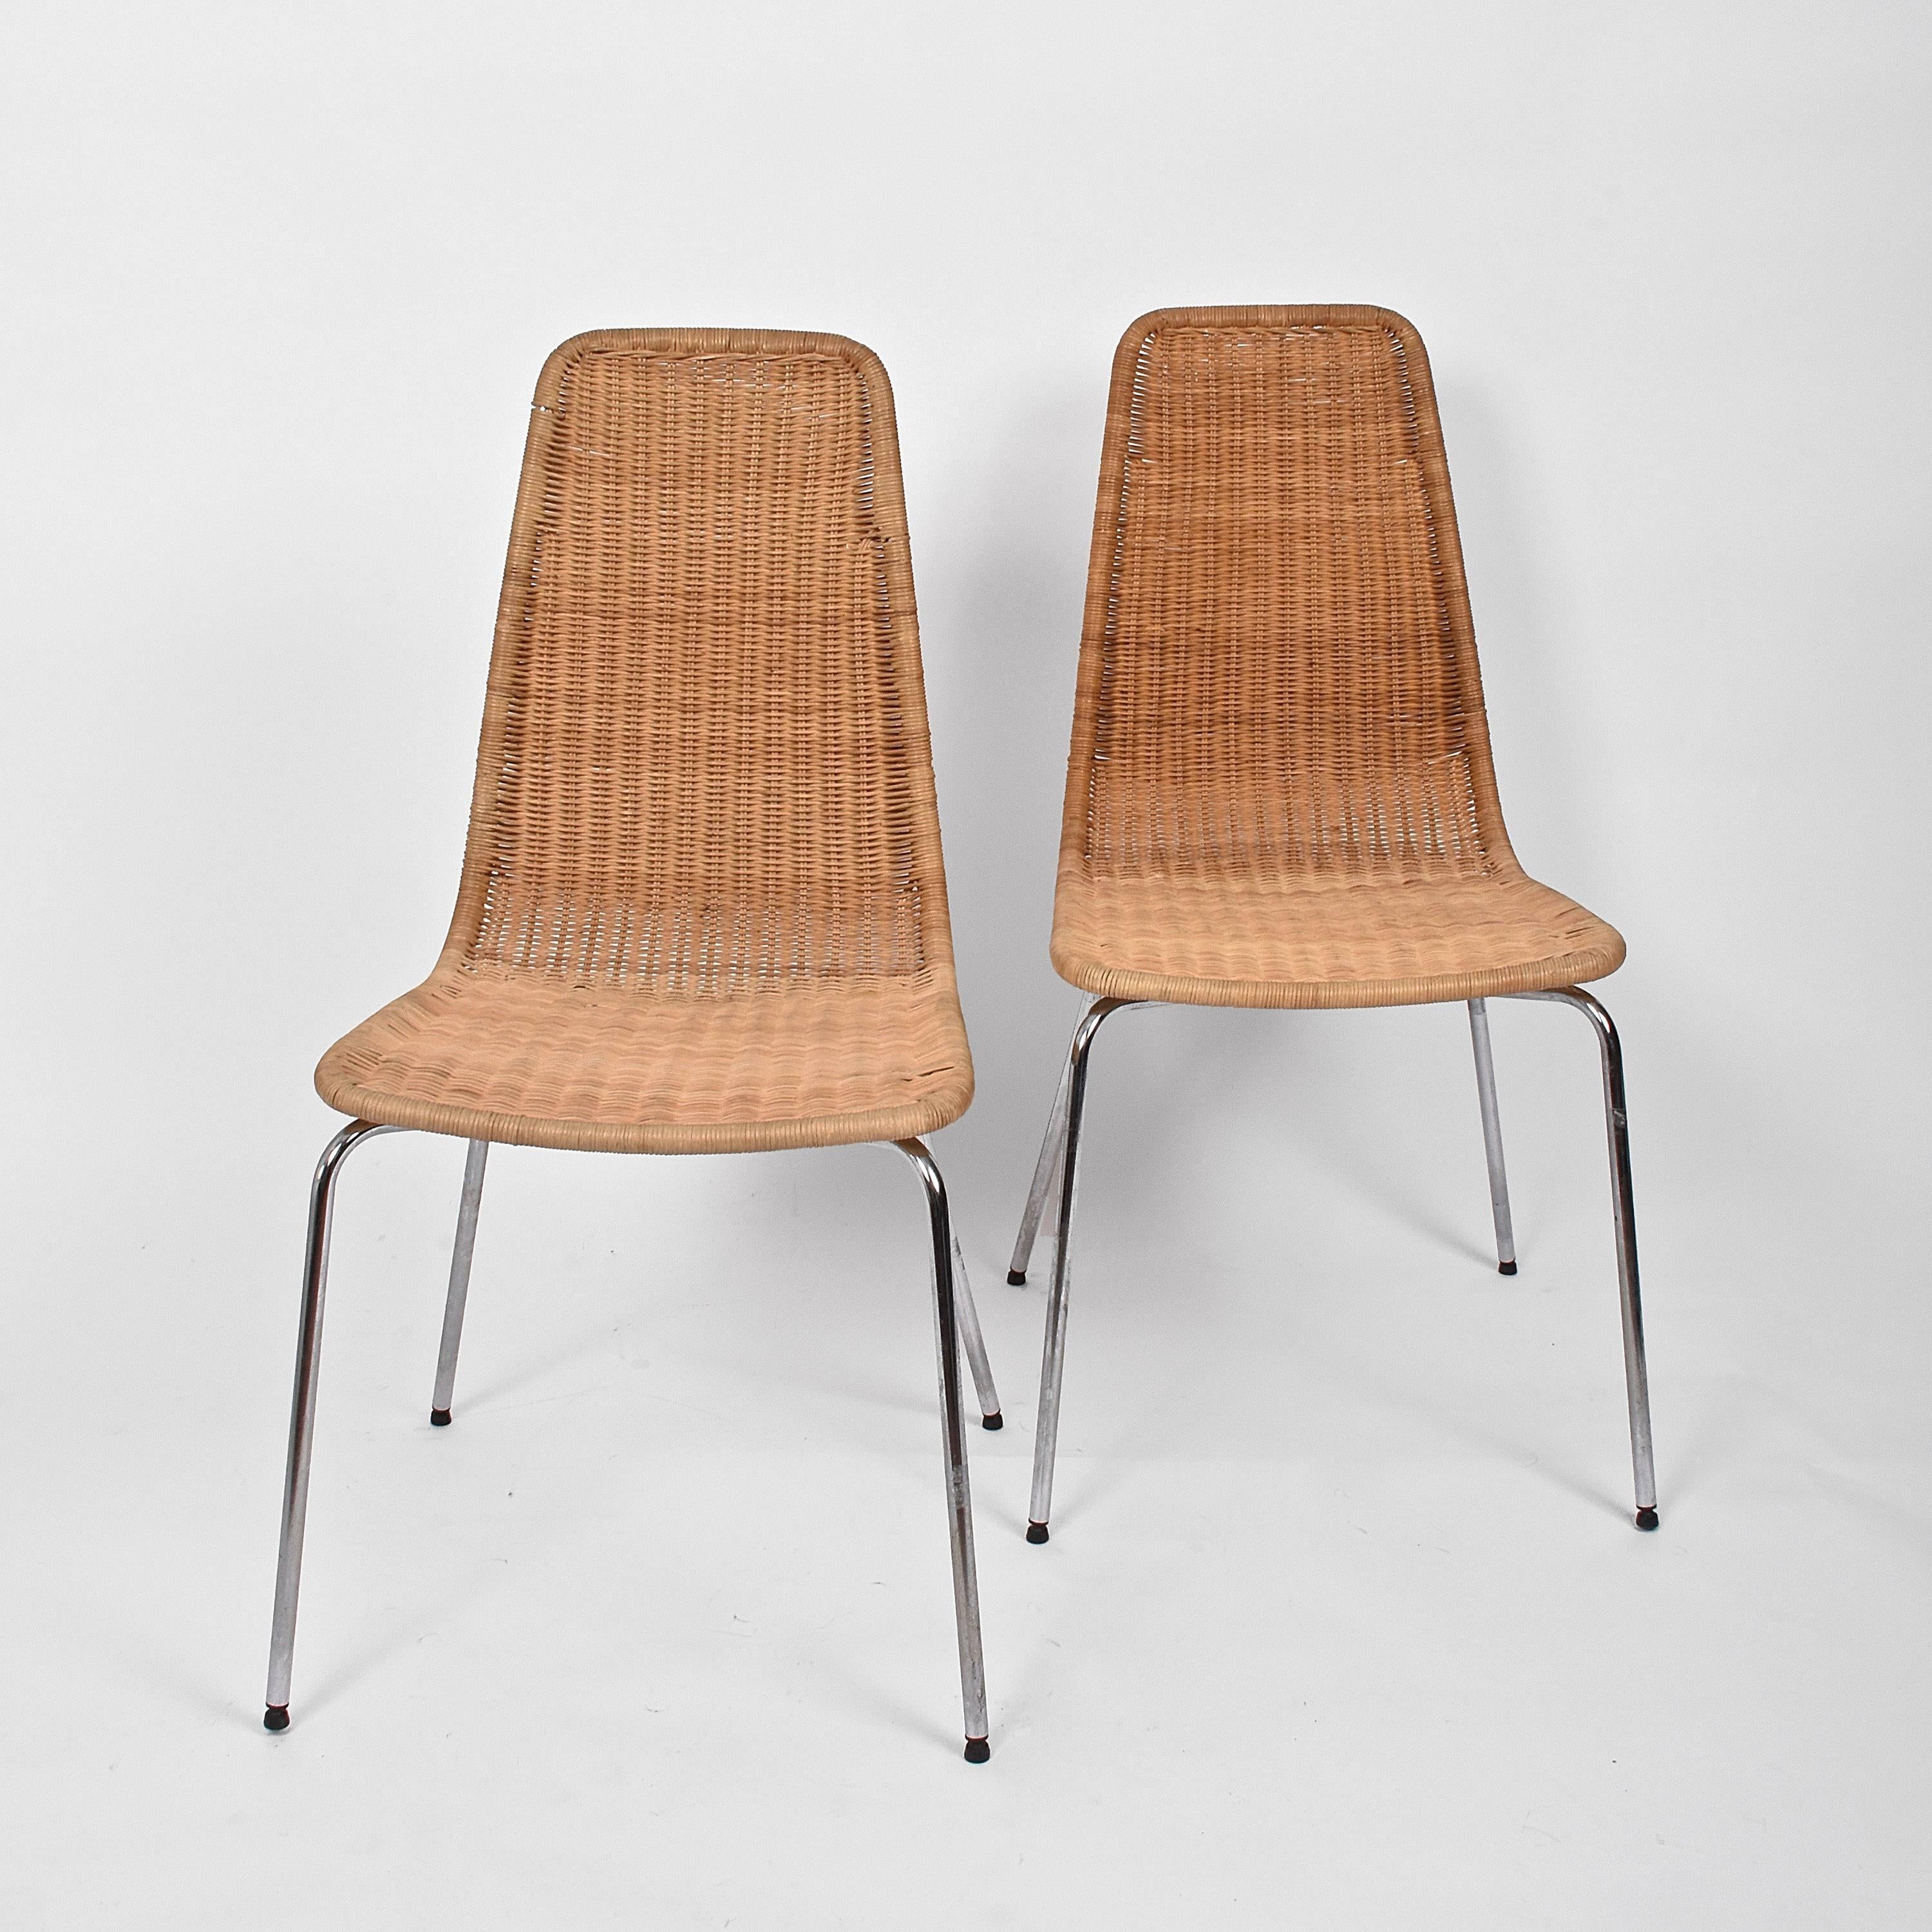 Late 20th Century Midcentury Removable Rattan Wicker and Chromed Metal Italian Chairs, 1970s